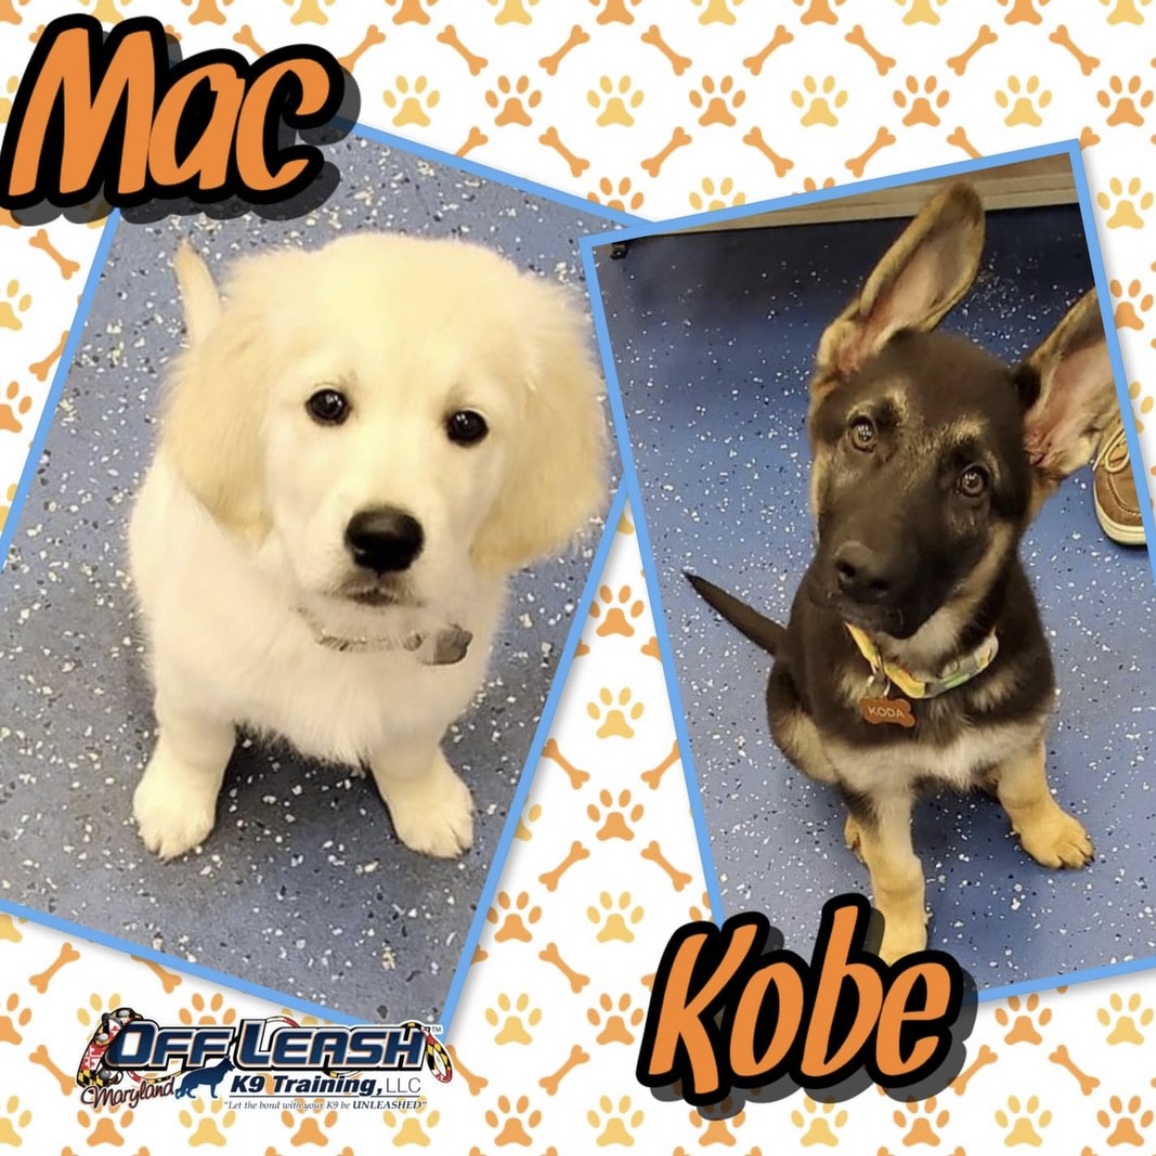 Two puppies, Mac and Kobe, who completed our obedience training for puppies